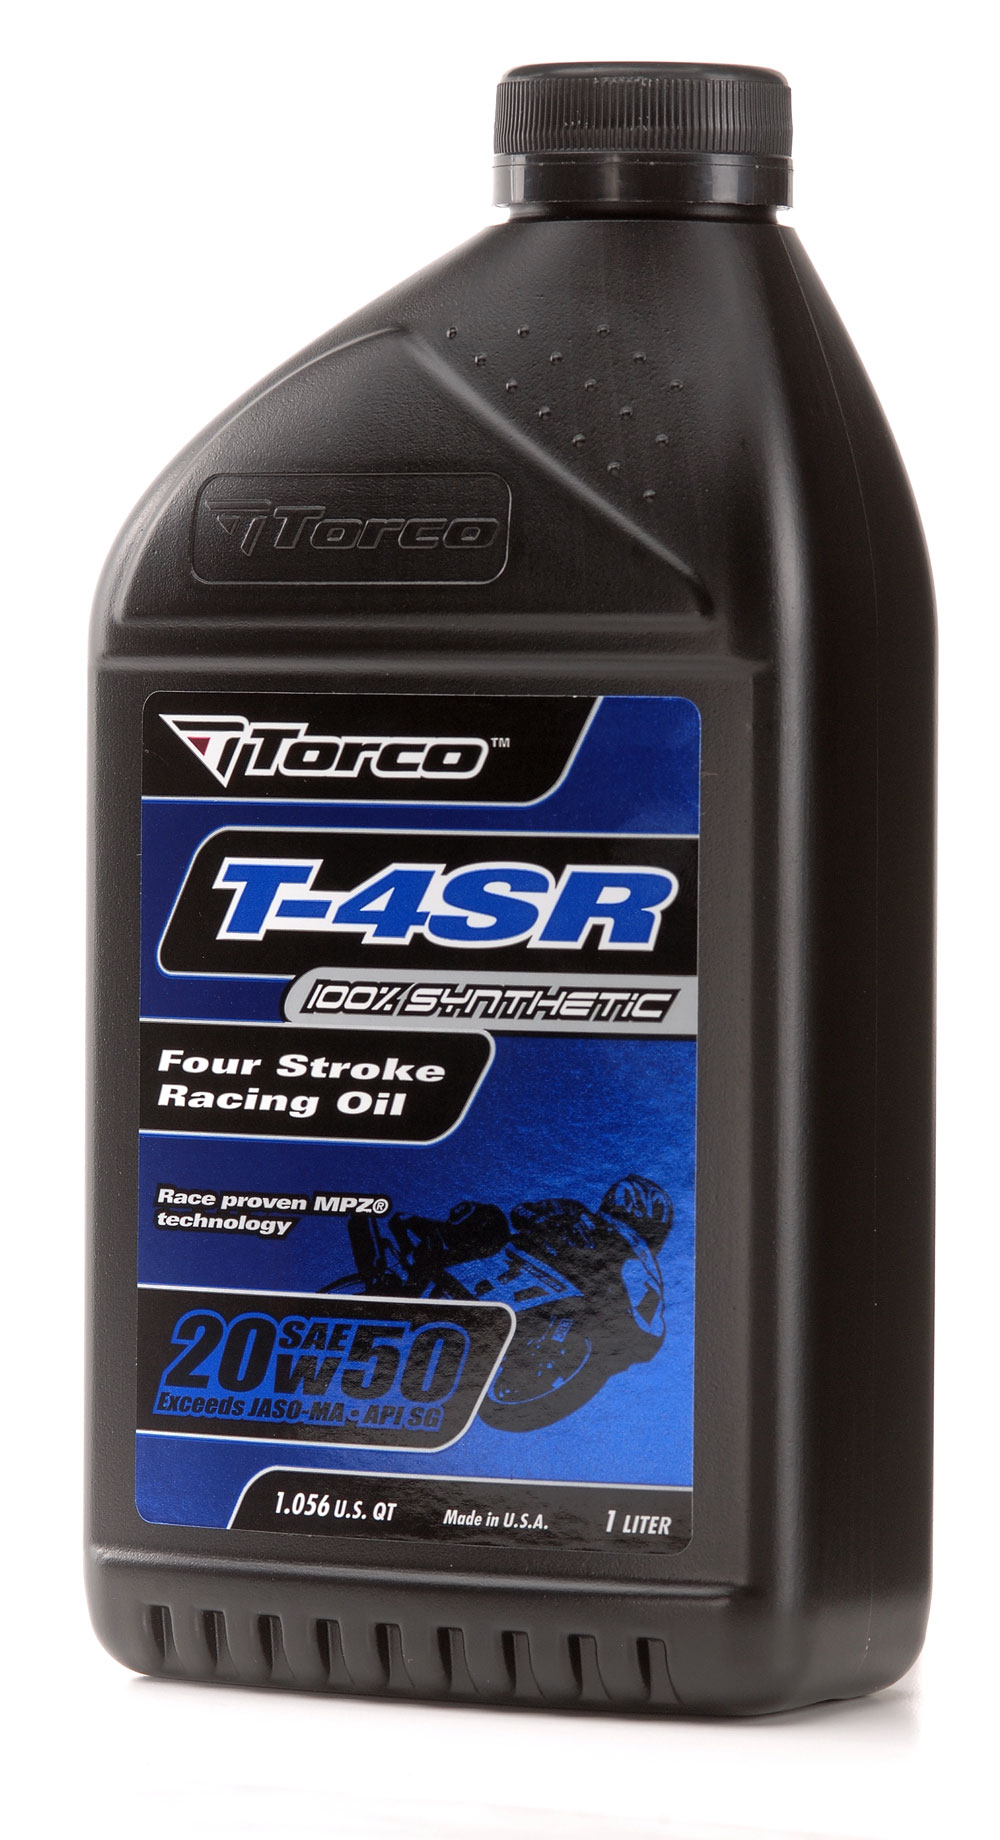 Buy Online, Worldwide Delivery Torco Malaysia T-4SR 4 STROKE RACING OIL 20W50